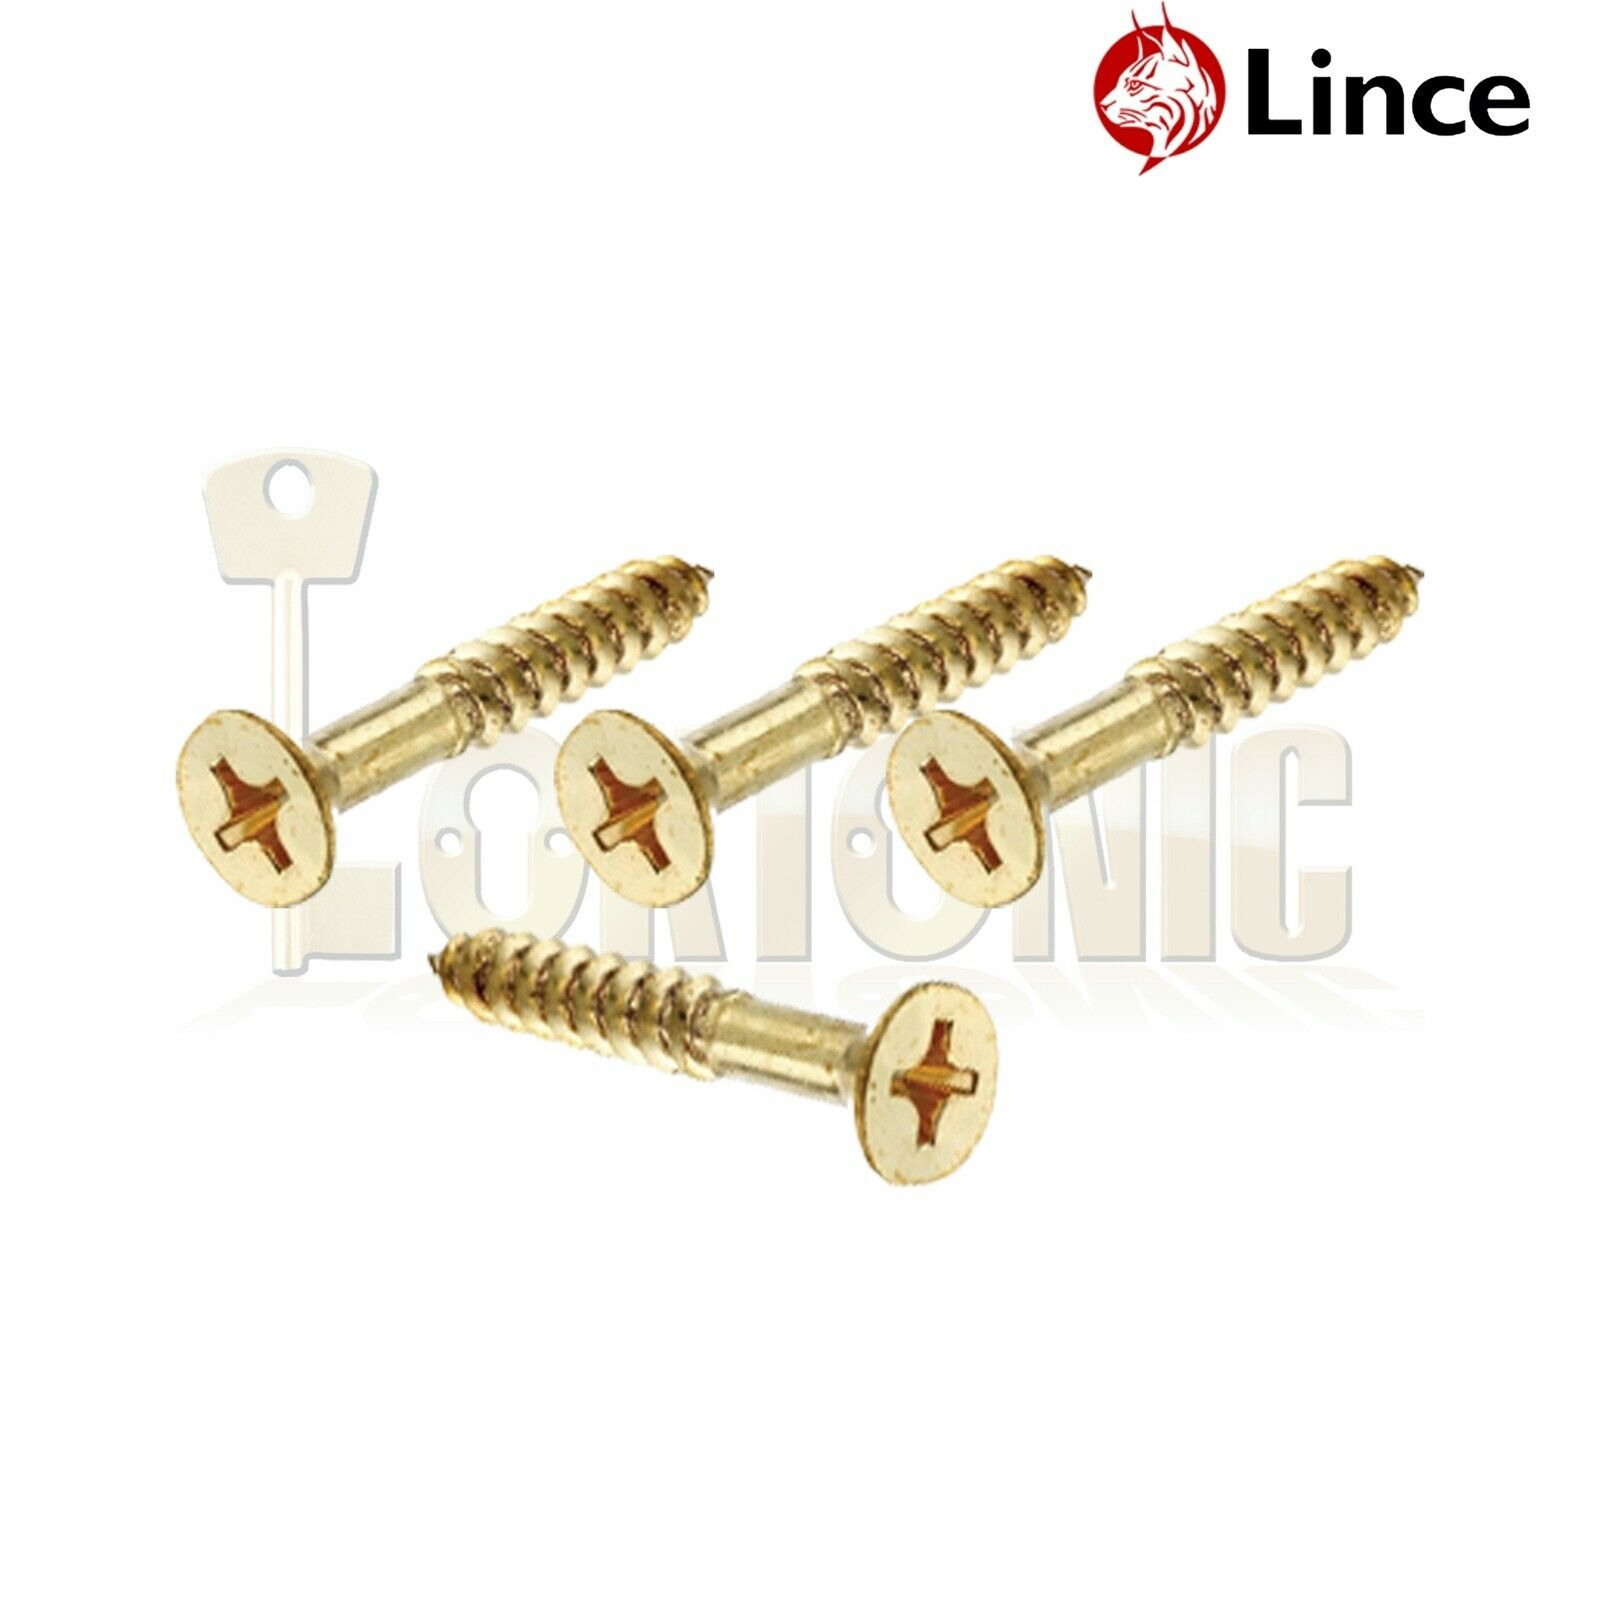 Details about   Lince High Security Mortice Sliding Door Auto Locking Hook Claw Bolt Sash Lock 